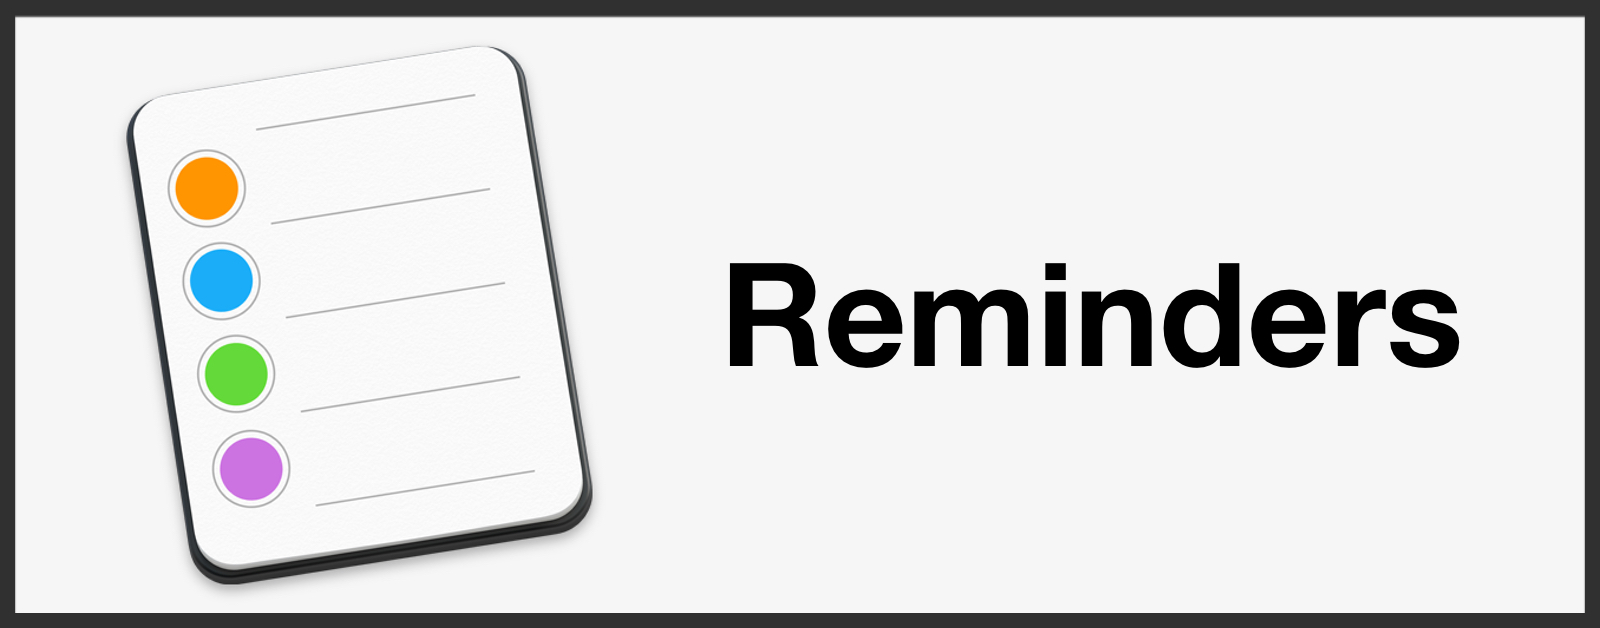 Set reminders for files macos windows 7